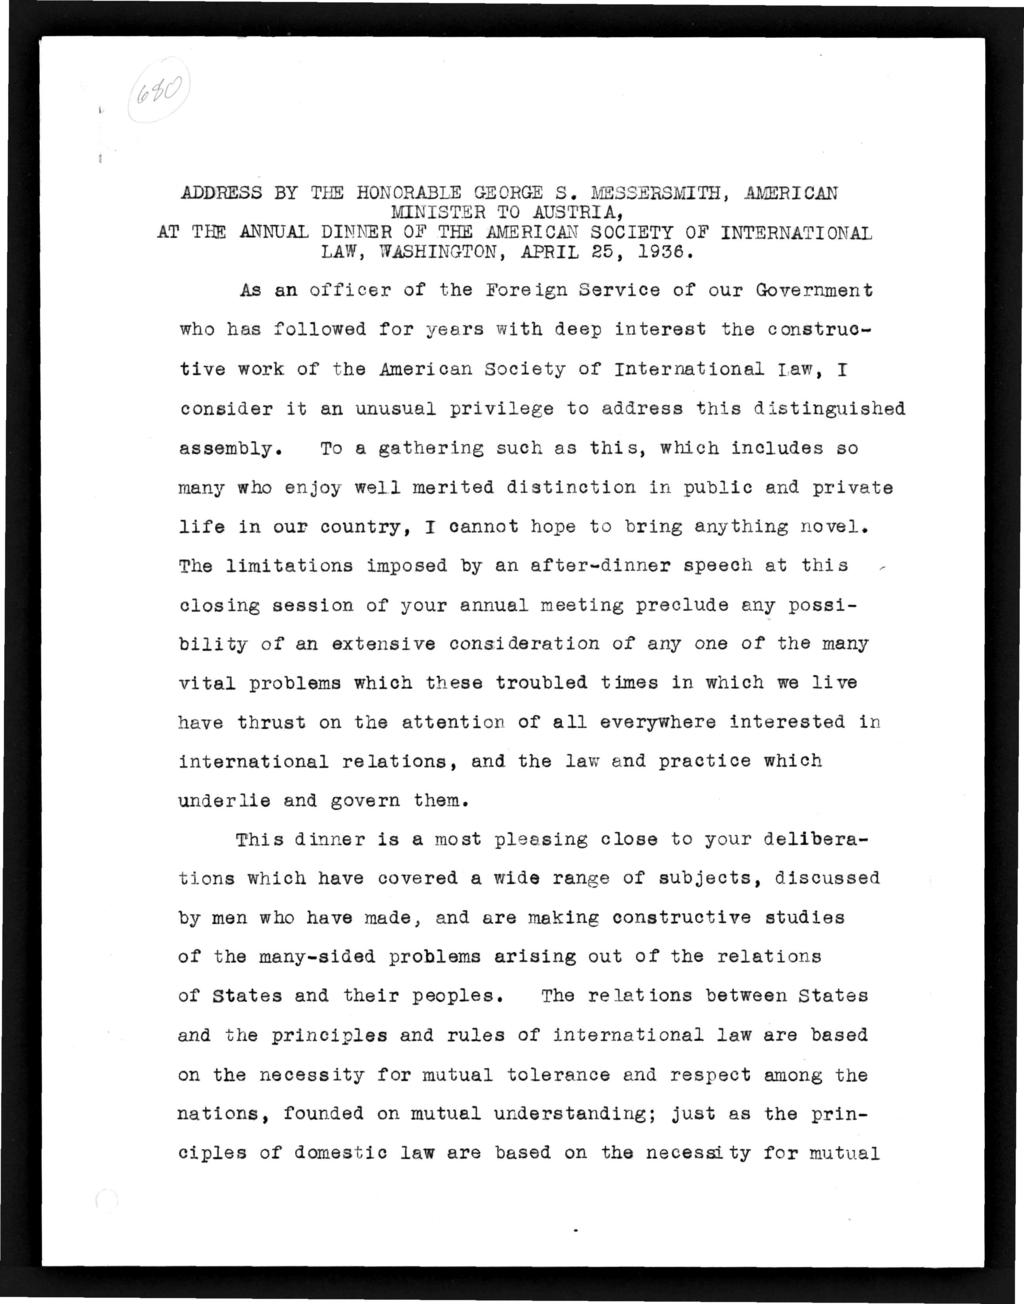 ADDRESS BY THE HONORABLE GEORGE S. MESSERSMITH, AMERICAN MINISTER TO AUSTRIA, AT THE ANNUAL DINNER OF THE AMERICAN SOCIETY OF INTERNATIONAL LAW, WASHINGTON, APRIL 85, 1936.